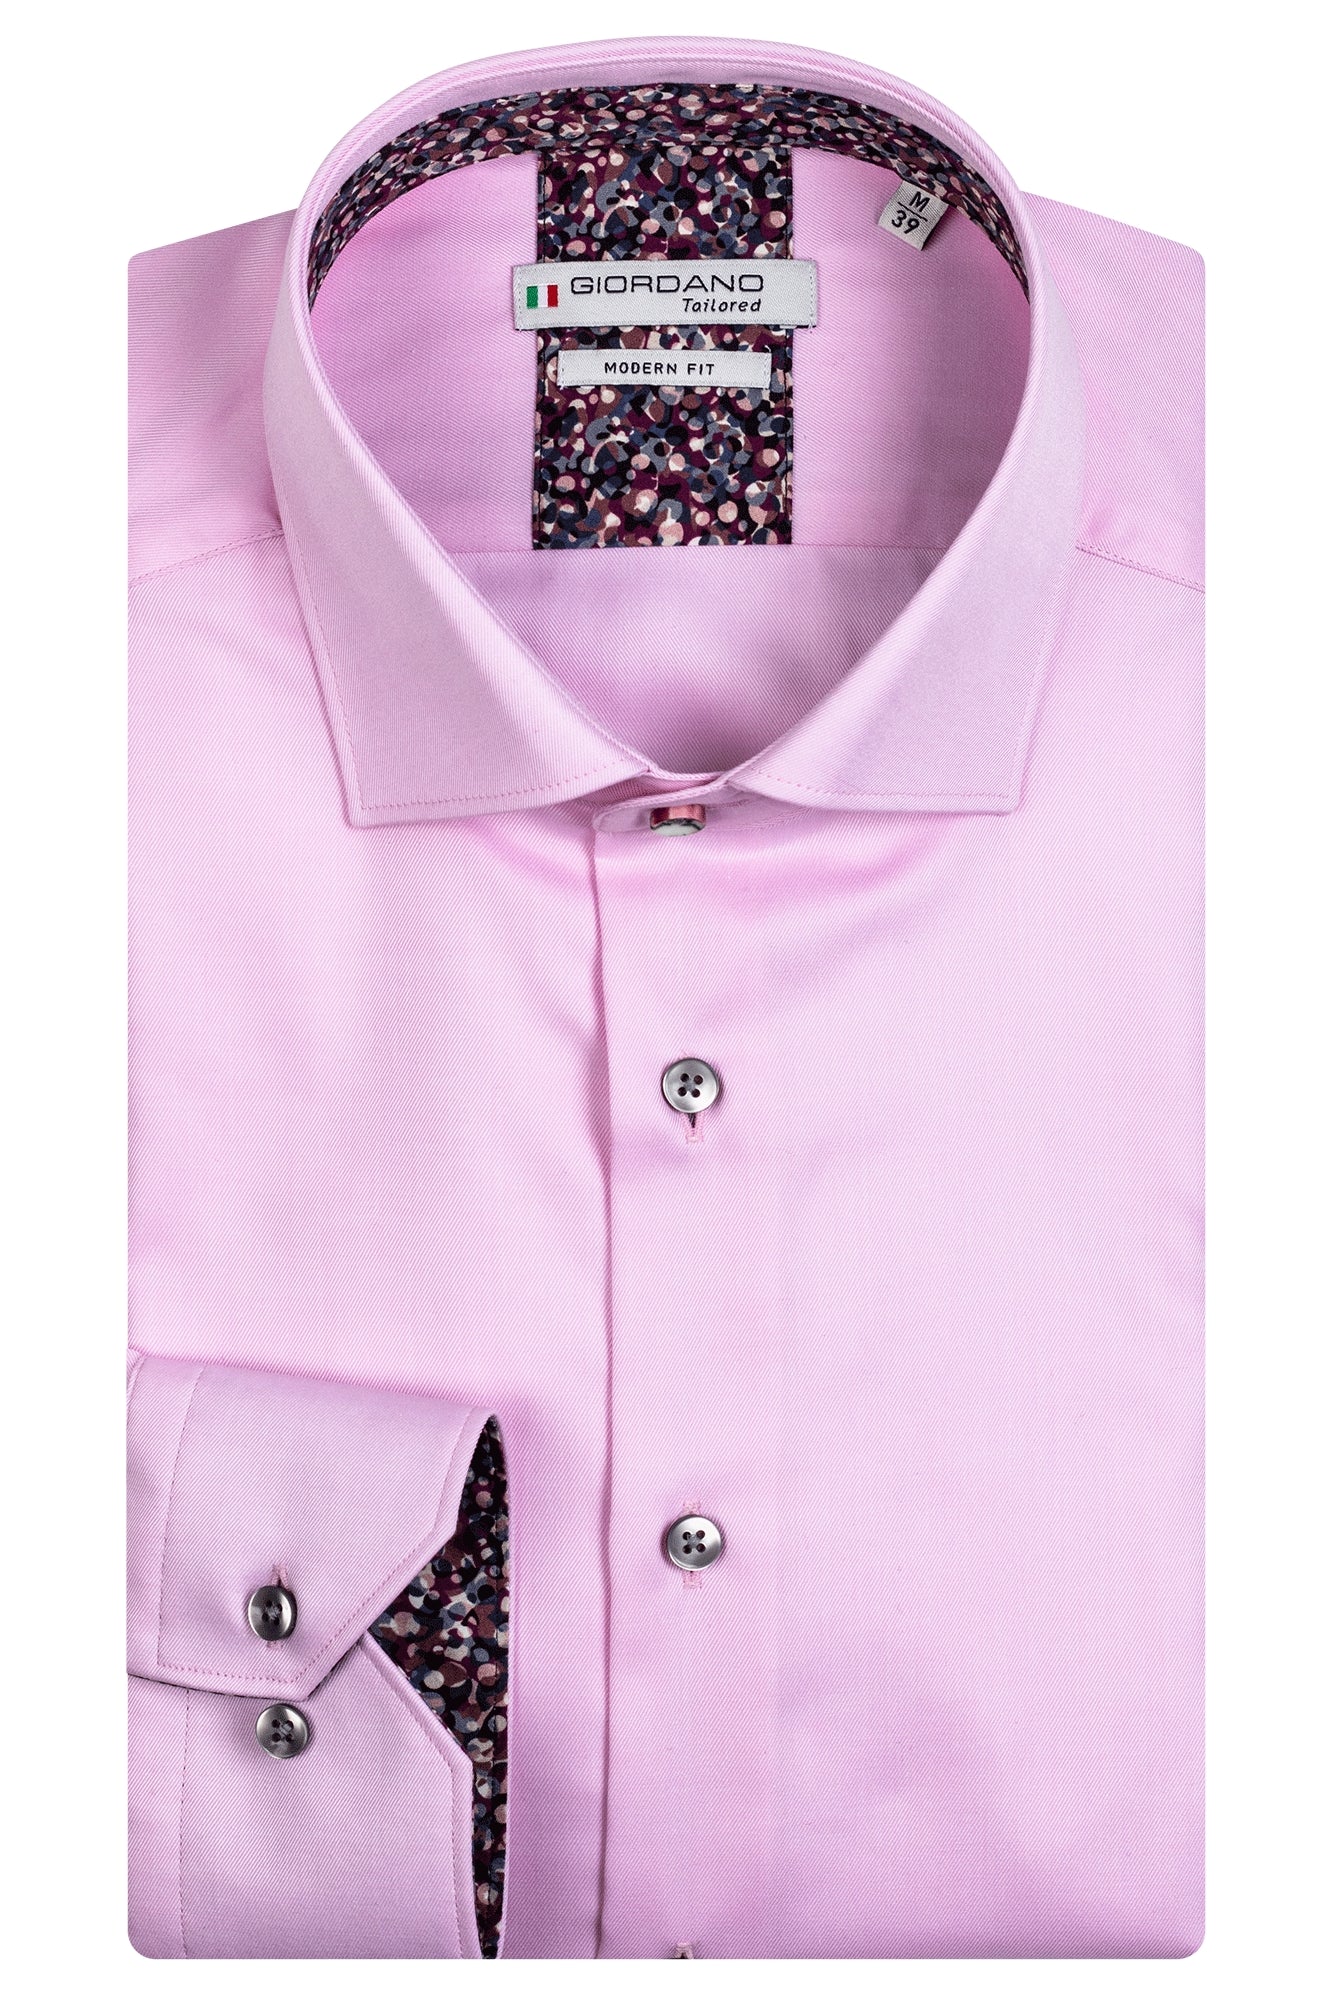 Burgundy detailed pink shirt by Giordano